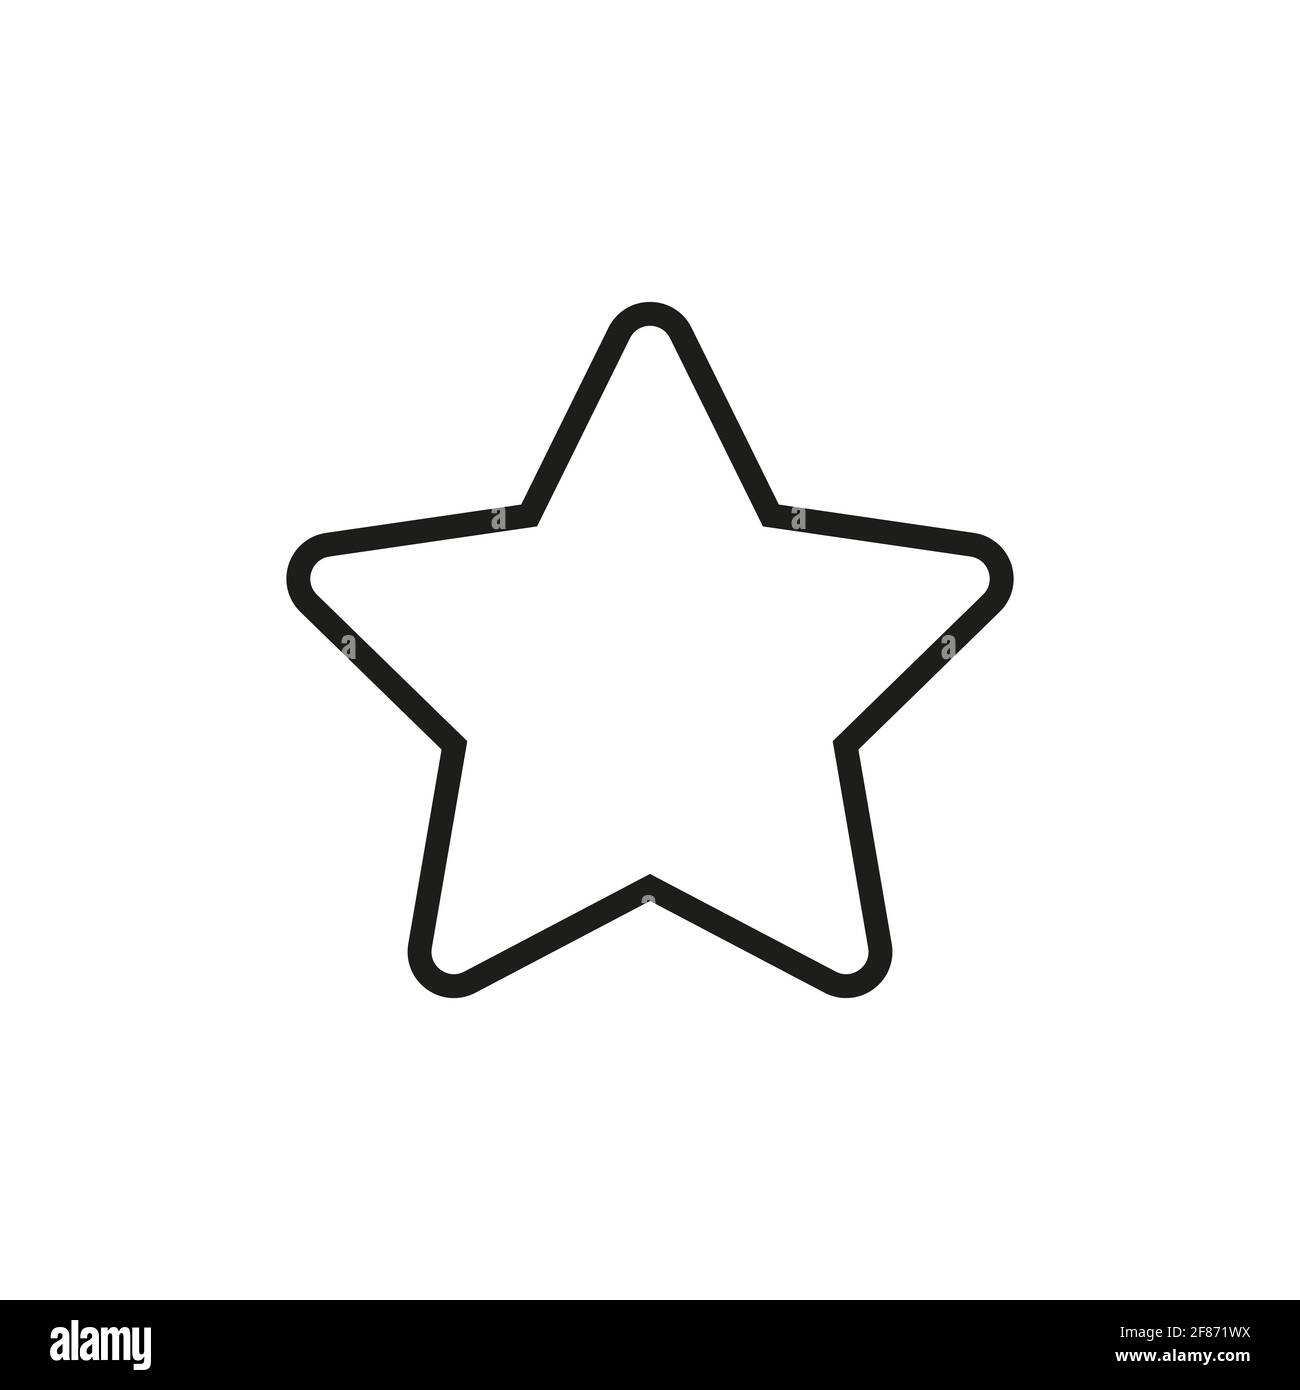 Star vector icon. Star symbols isolated. Stock Vector